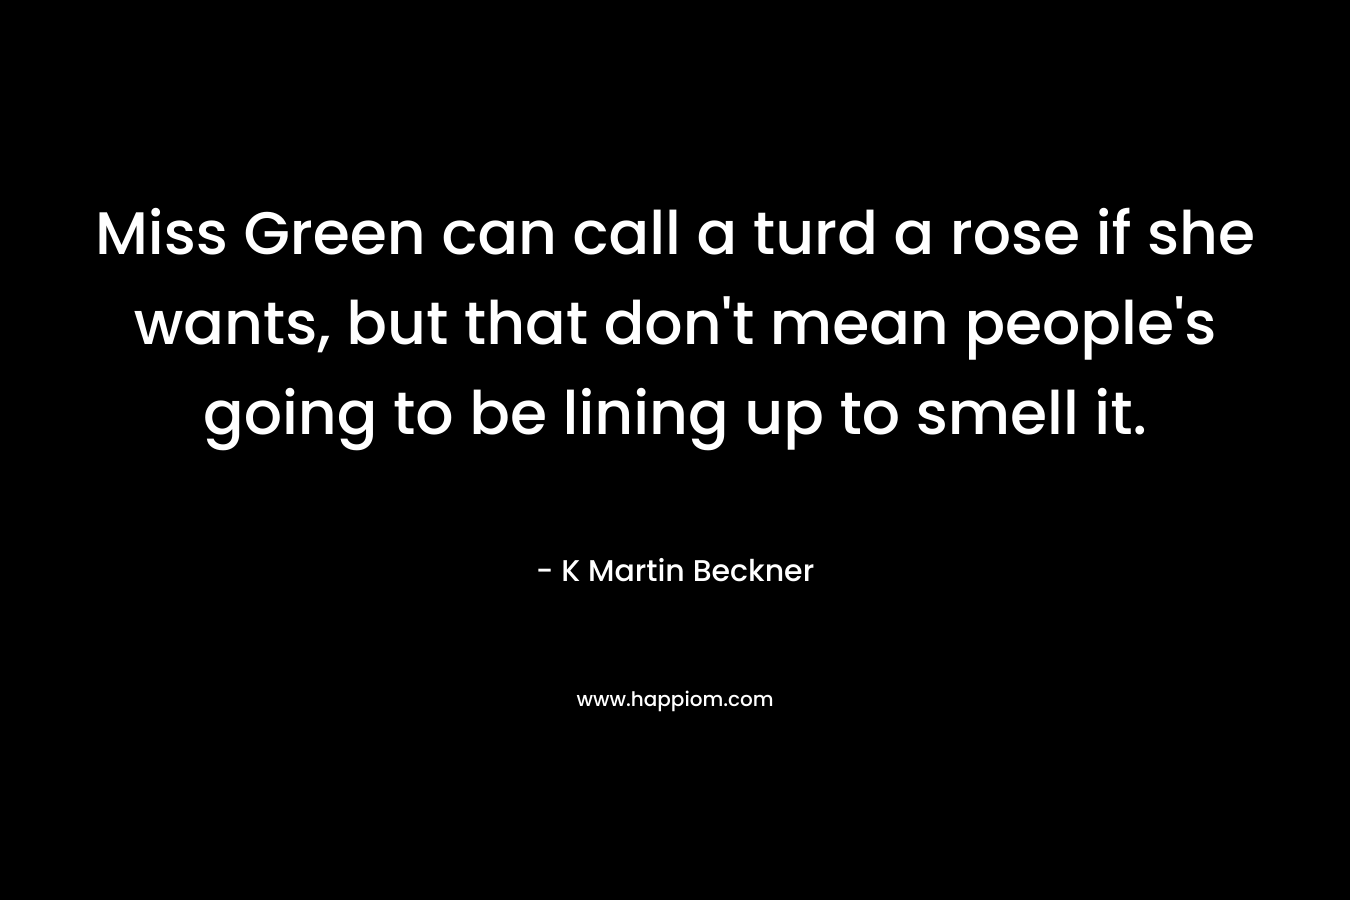 Miss Green can call a turd a rose if she wants, but that don't mean people's going to be lining up to smell it.